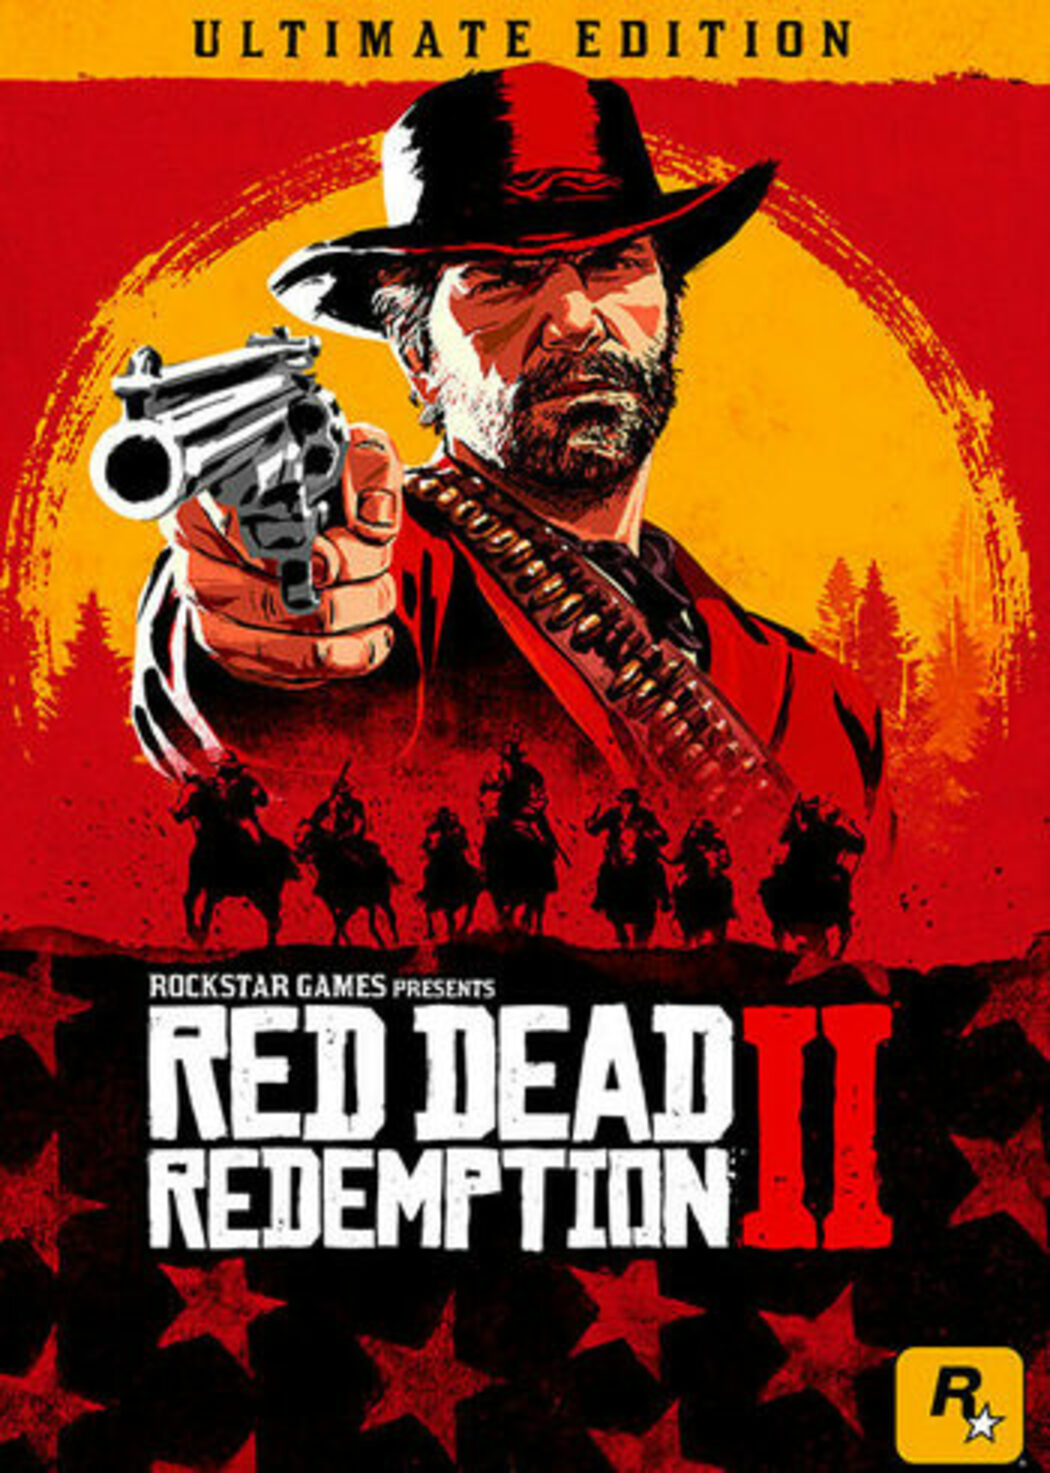 Red Dead Redemption 2 - PC [Online Game Code] : Video Games 